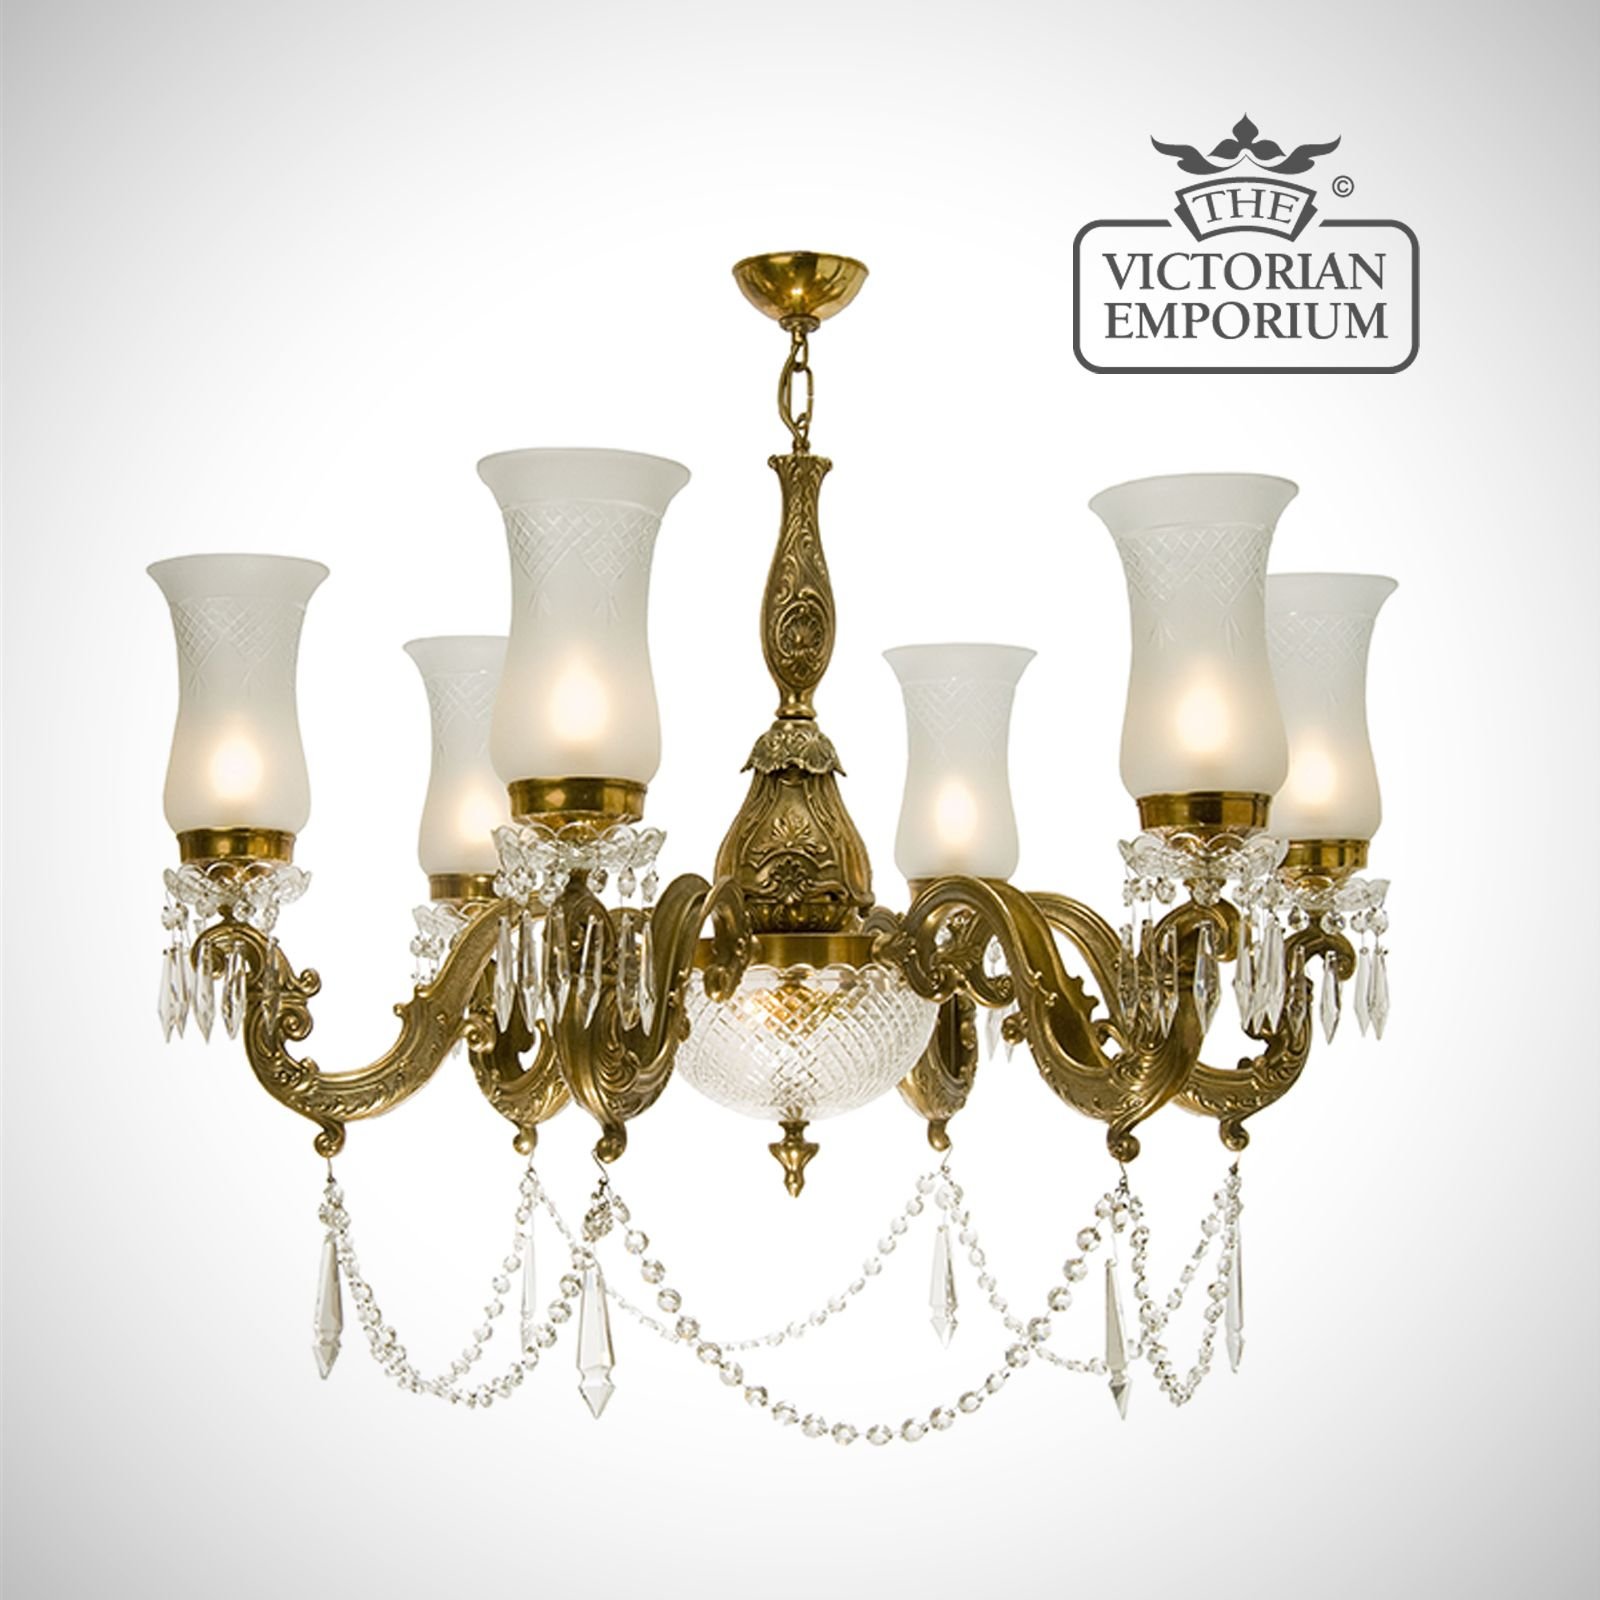 Chandelier with cut glass shades and 6 arms - large